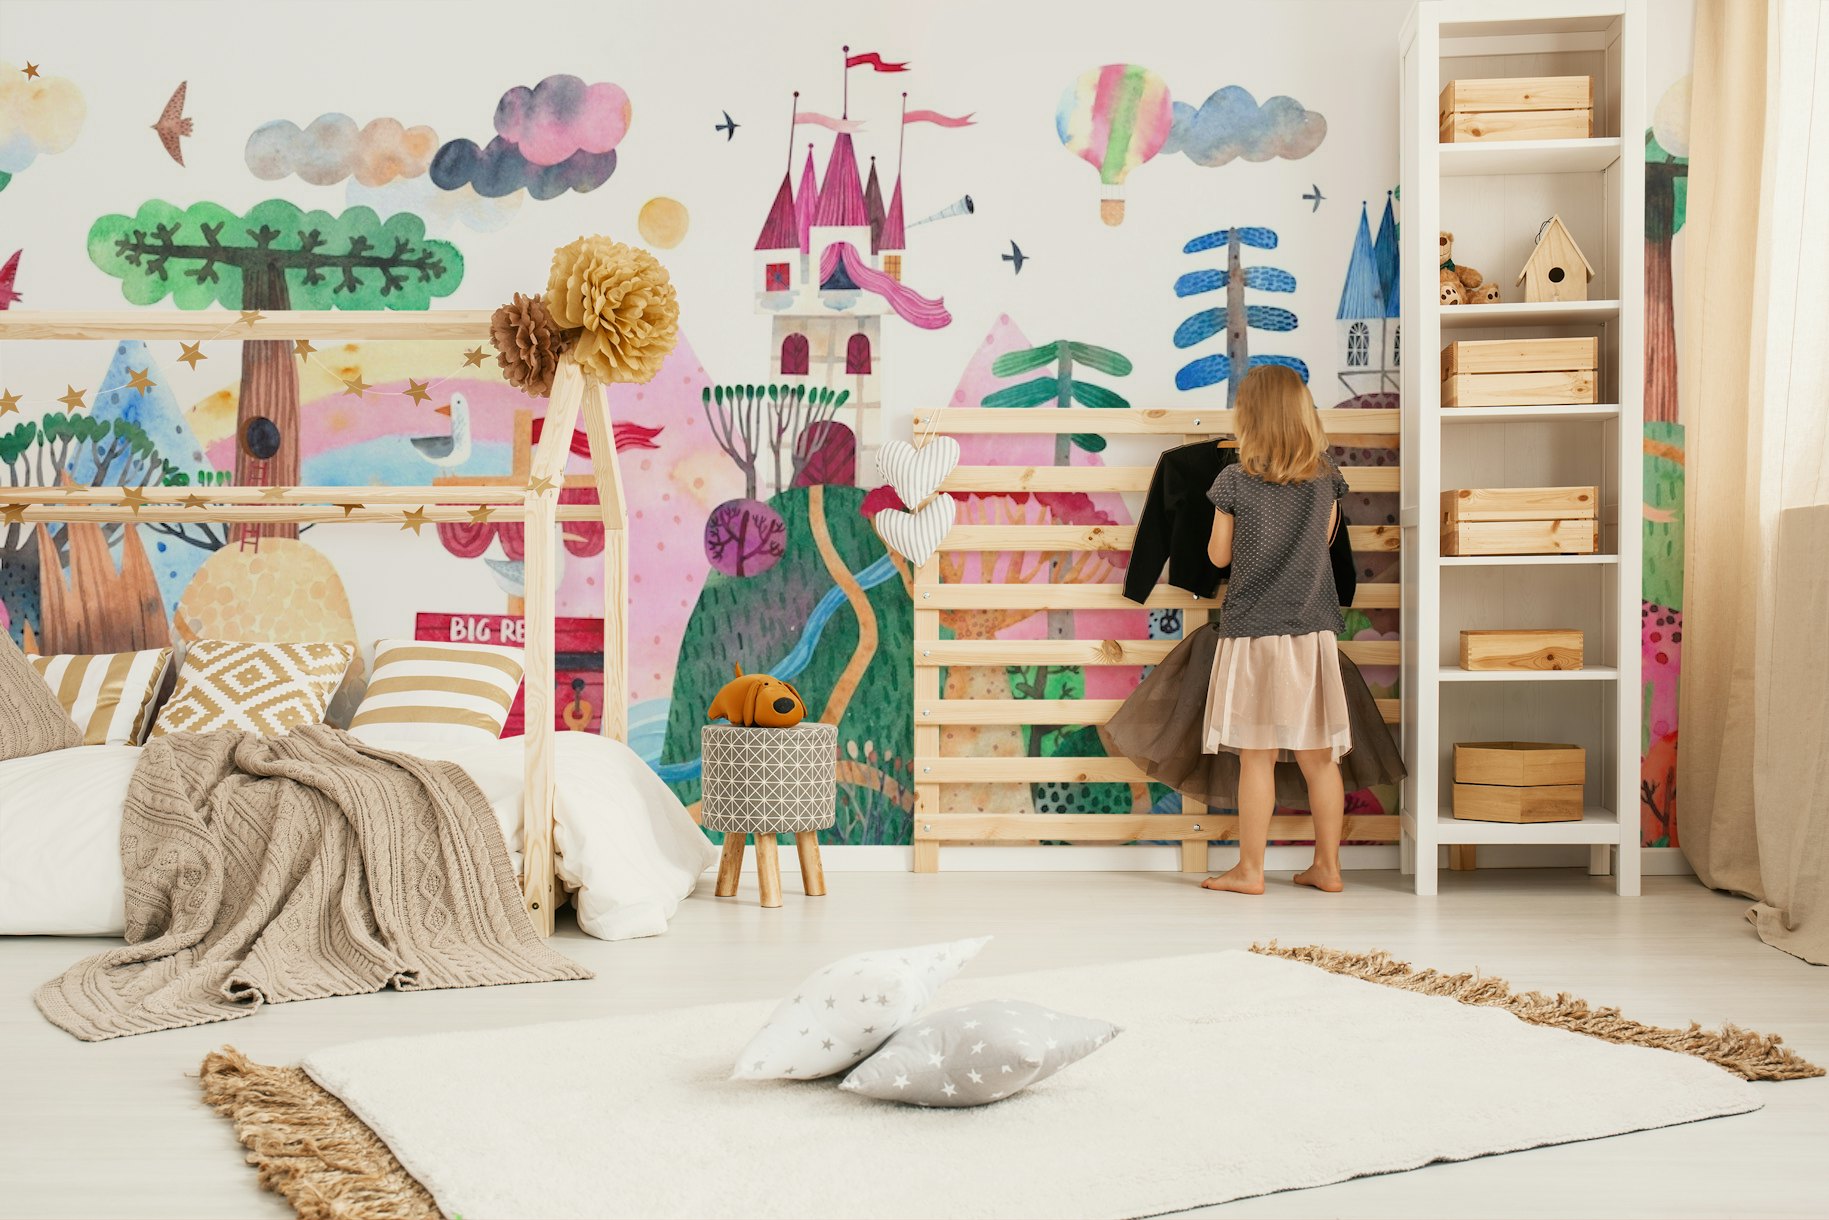 Beautiful Kids Wonderland Wallpaper Mural with castle, clouds, and animals